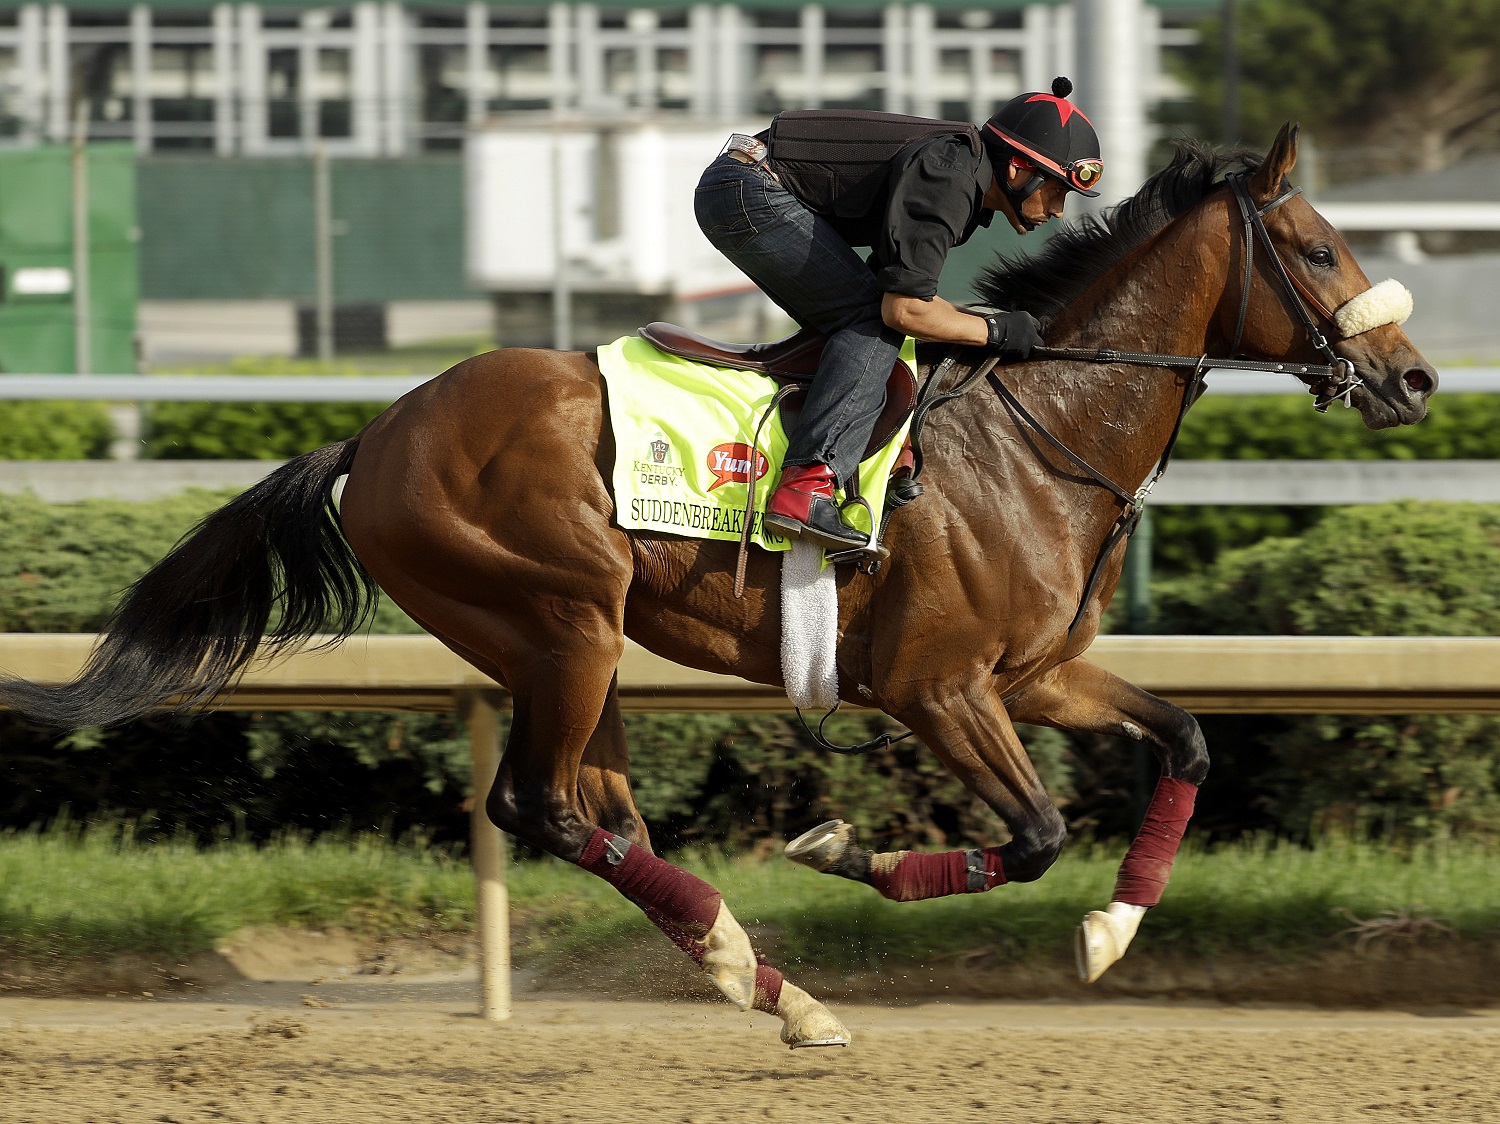 Exercise rider Ramiro Gorostieta rides Kentucky Derby hopeful Suddenbreakingnews during a workout at Churchill Downs Monday, May 2, 2016, in Louisville, Ky. The 142nd running of the Kentucky Derby is scheduled for Saturday, May 7. (AP Photo/Charlie Riedel)